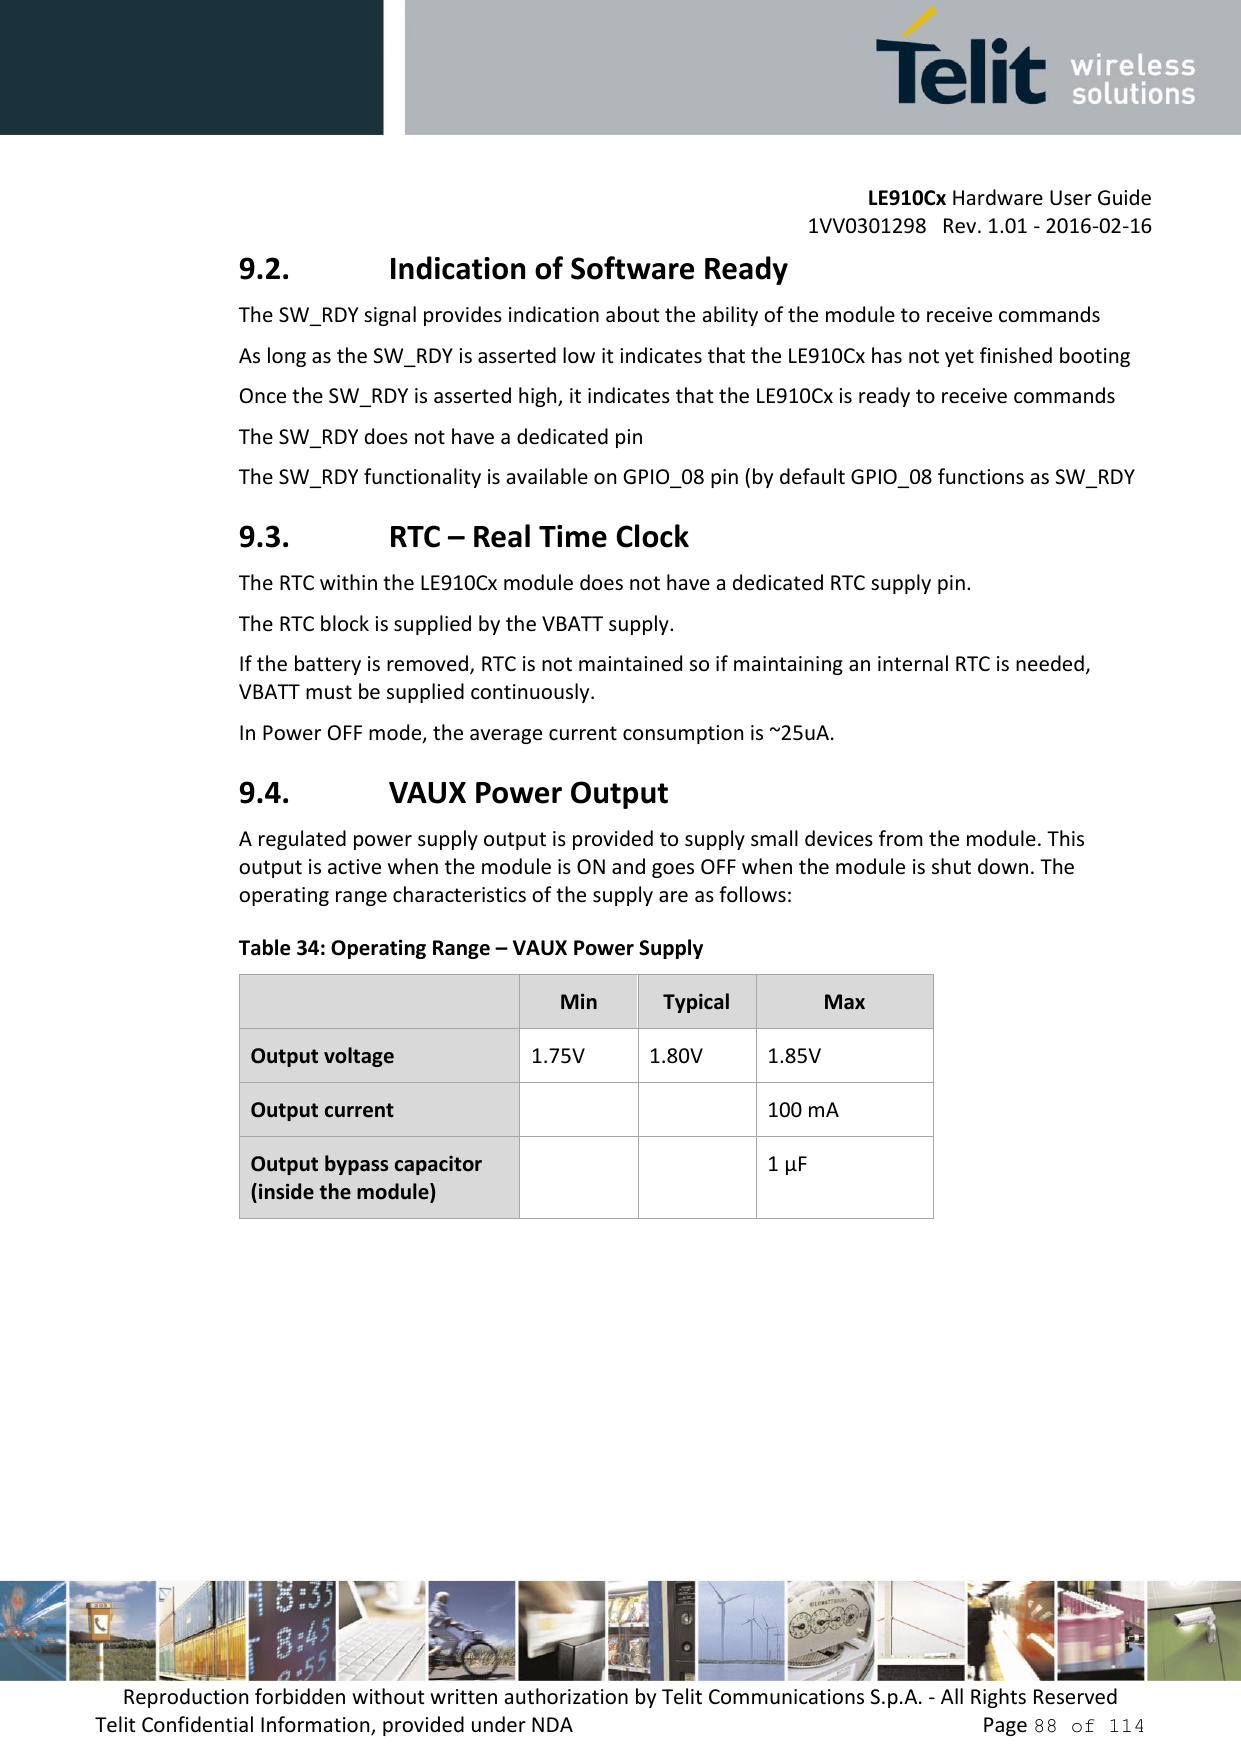 LE910Cx Hardware User Guide 1VV0301298   Rev. 1.01 - 2016-02-16 Reproduction forbidden without written authorization by Telit Communications S.p.A. - All Rights Reserved Telit Confidential Information, provided under NDA   Page 88 of 114 9.2. Indication of Software Ready The SW_RDY signal provides indication about the ability of the module to receive commands As long as the SW_RDY is asserted low it indicates that the LE910Cx has not yet finished booting Once the SW_RDY is asserted high, it indicates that the LE910Cx is ready to receive commands  The SW_RDY does not have a dedicated pin  The SW_RDY functionality is available on GPIO_08 pin (by default GPIO_08 functions as SW_RDY 9.3. RTC – Real Time Clock The RTC within the LE910Cx module does not have a dedicated RTC supply pin. The RTC block is supplied by the VBATT supply. If the battery is removed, RTC is not maintained so if maintaining an internal RTC is needed, VBATT must be supplied continuously. In Power OFF mode, the average current consumption is ~25uA. 9.4. VAUX Power Output A regulated power supply output is provided to supply small devices from the module. This output is active when the module is ON and goes OFF when the module is shut down. The operating range characteristics of the supply are as follows: Table 34: Operating Range – VAUX Power Supply Min Typical Max Output voltage 1.75V 1.80V 1.85V Output current 100 mA Output bypass capacitor (inside the module) 1 μF 